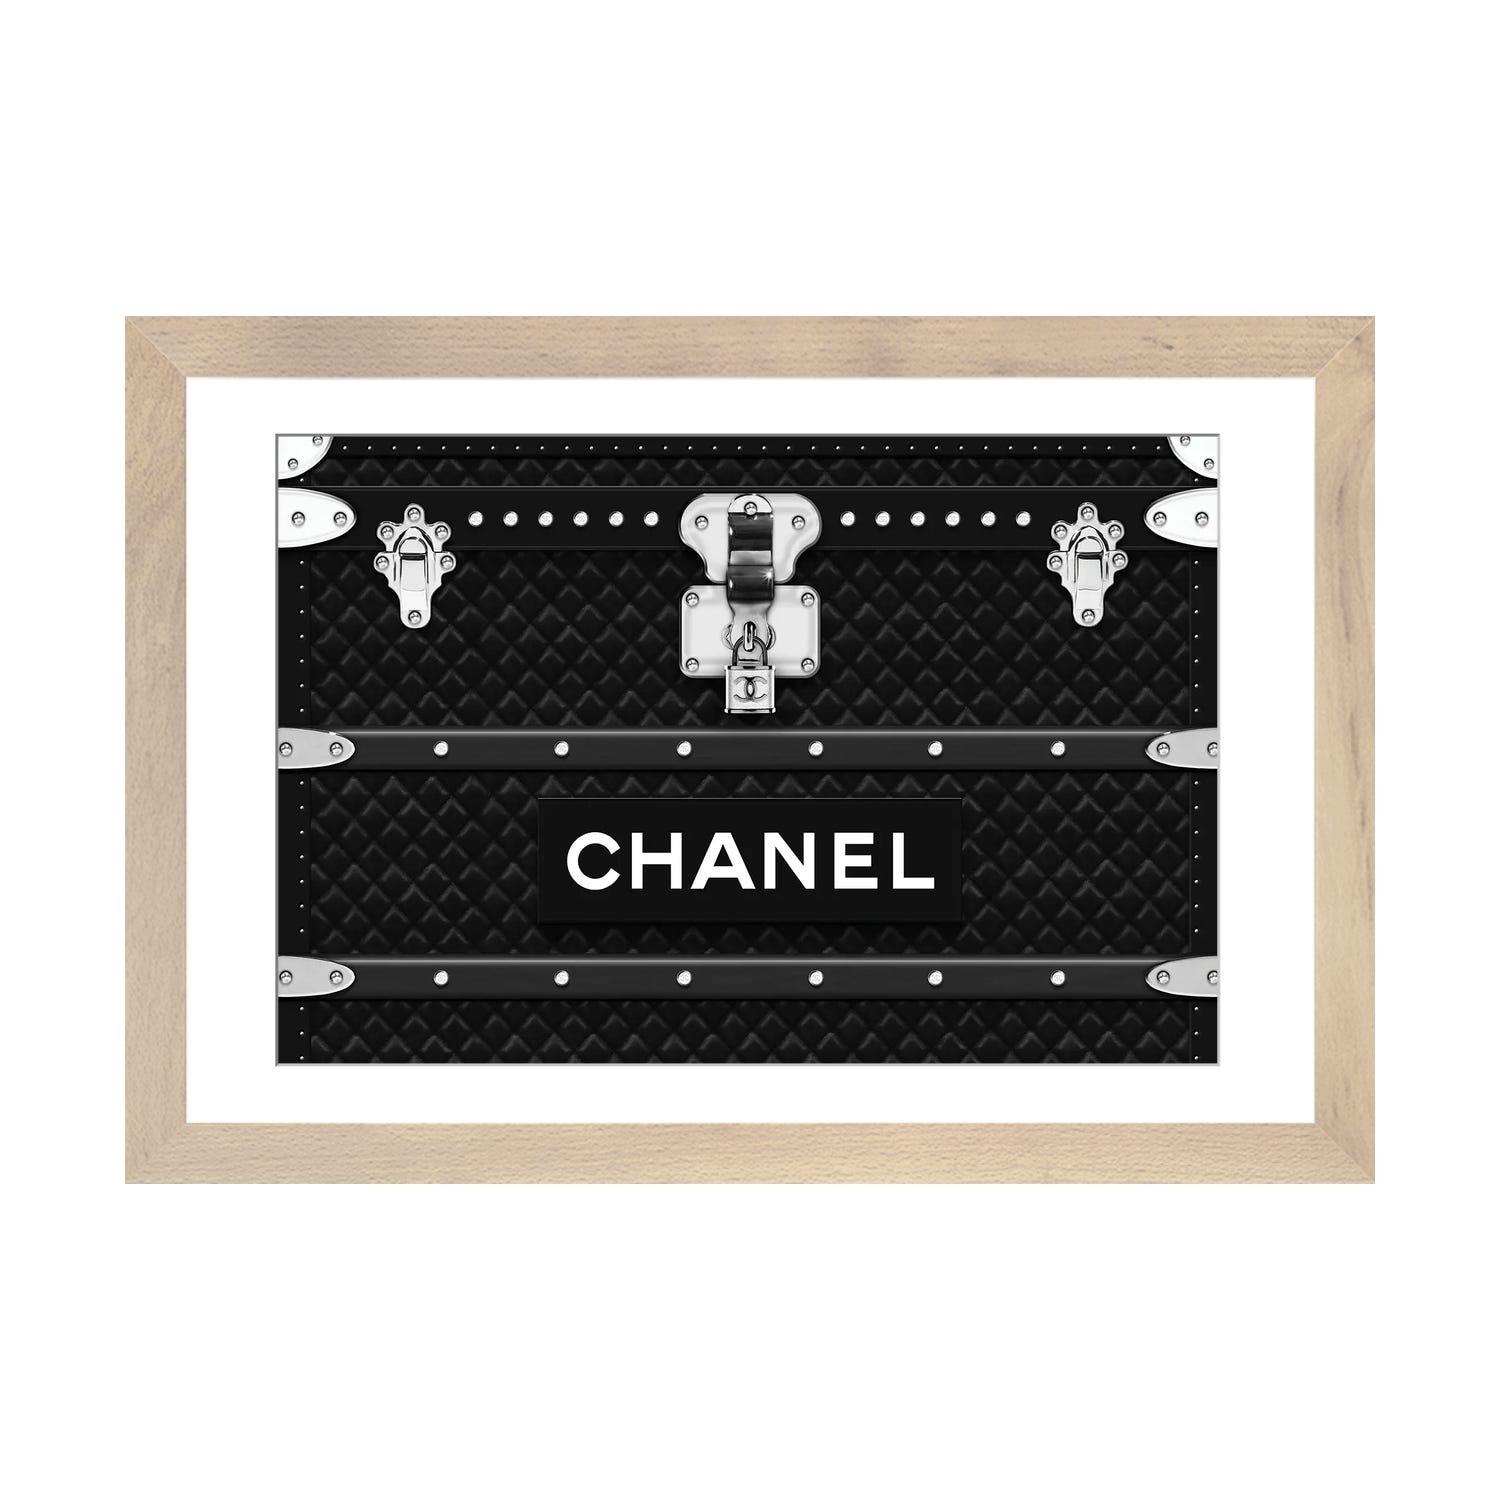 iCanvas Trunk Chanel by Frank Amoruso - Bed Bath & Beyond - 37468685